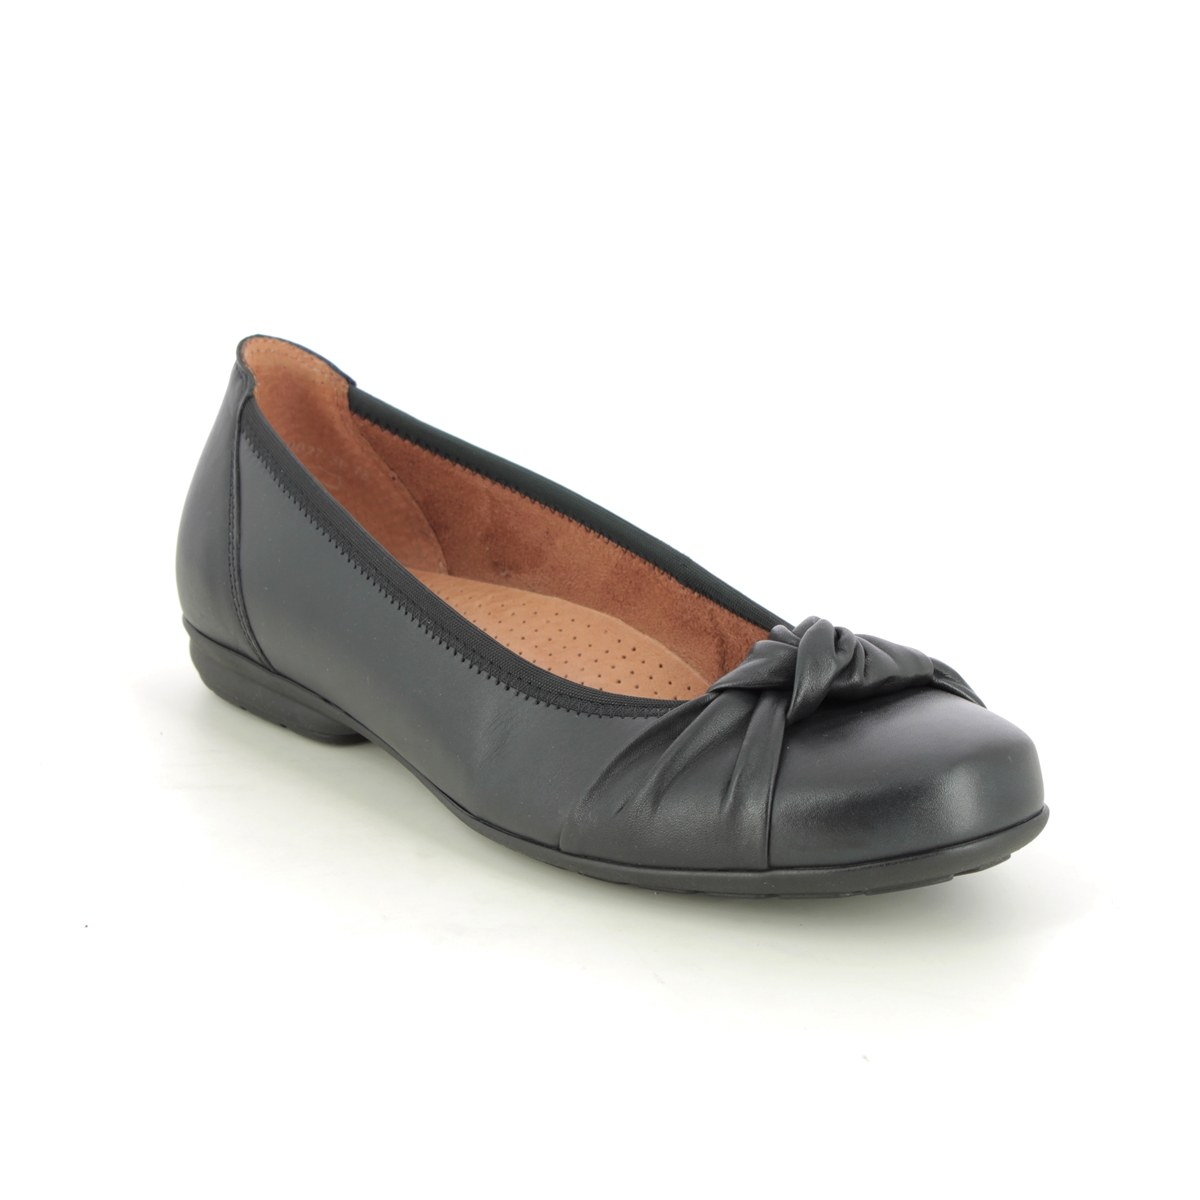 Gabor Ashlene Claredon Navy leather Womens pumps 02.643.56 in a Plain Leather in Size 4